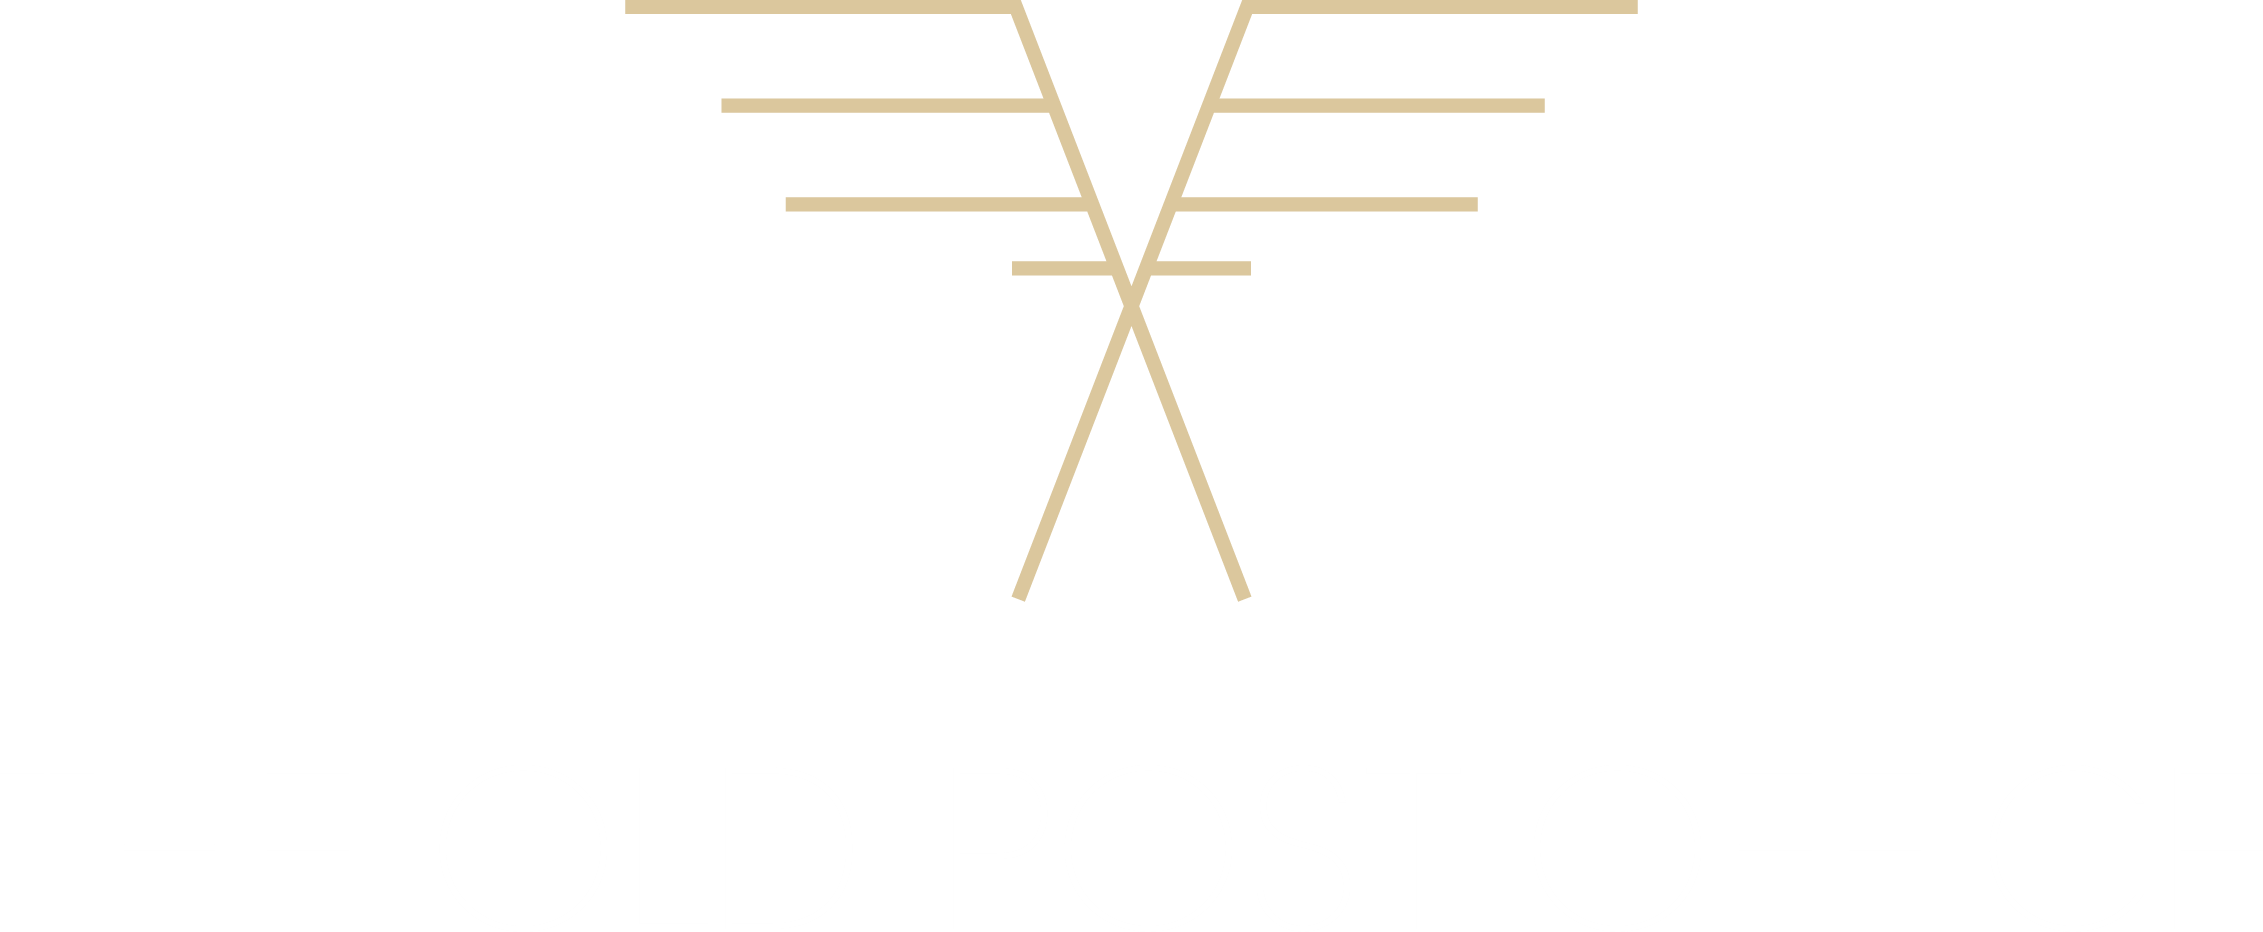 O1268703 - The Old Post Office 